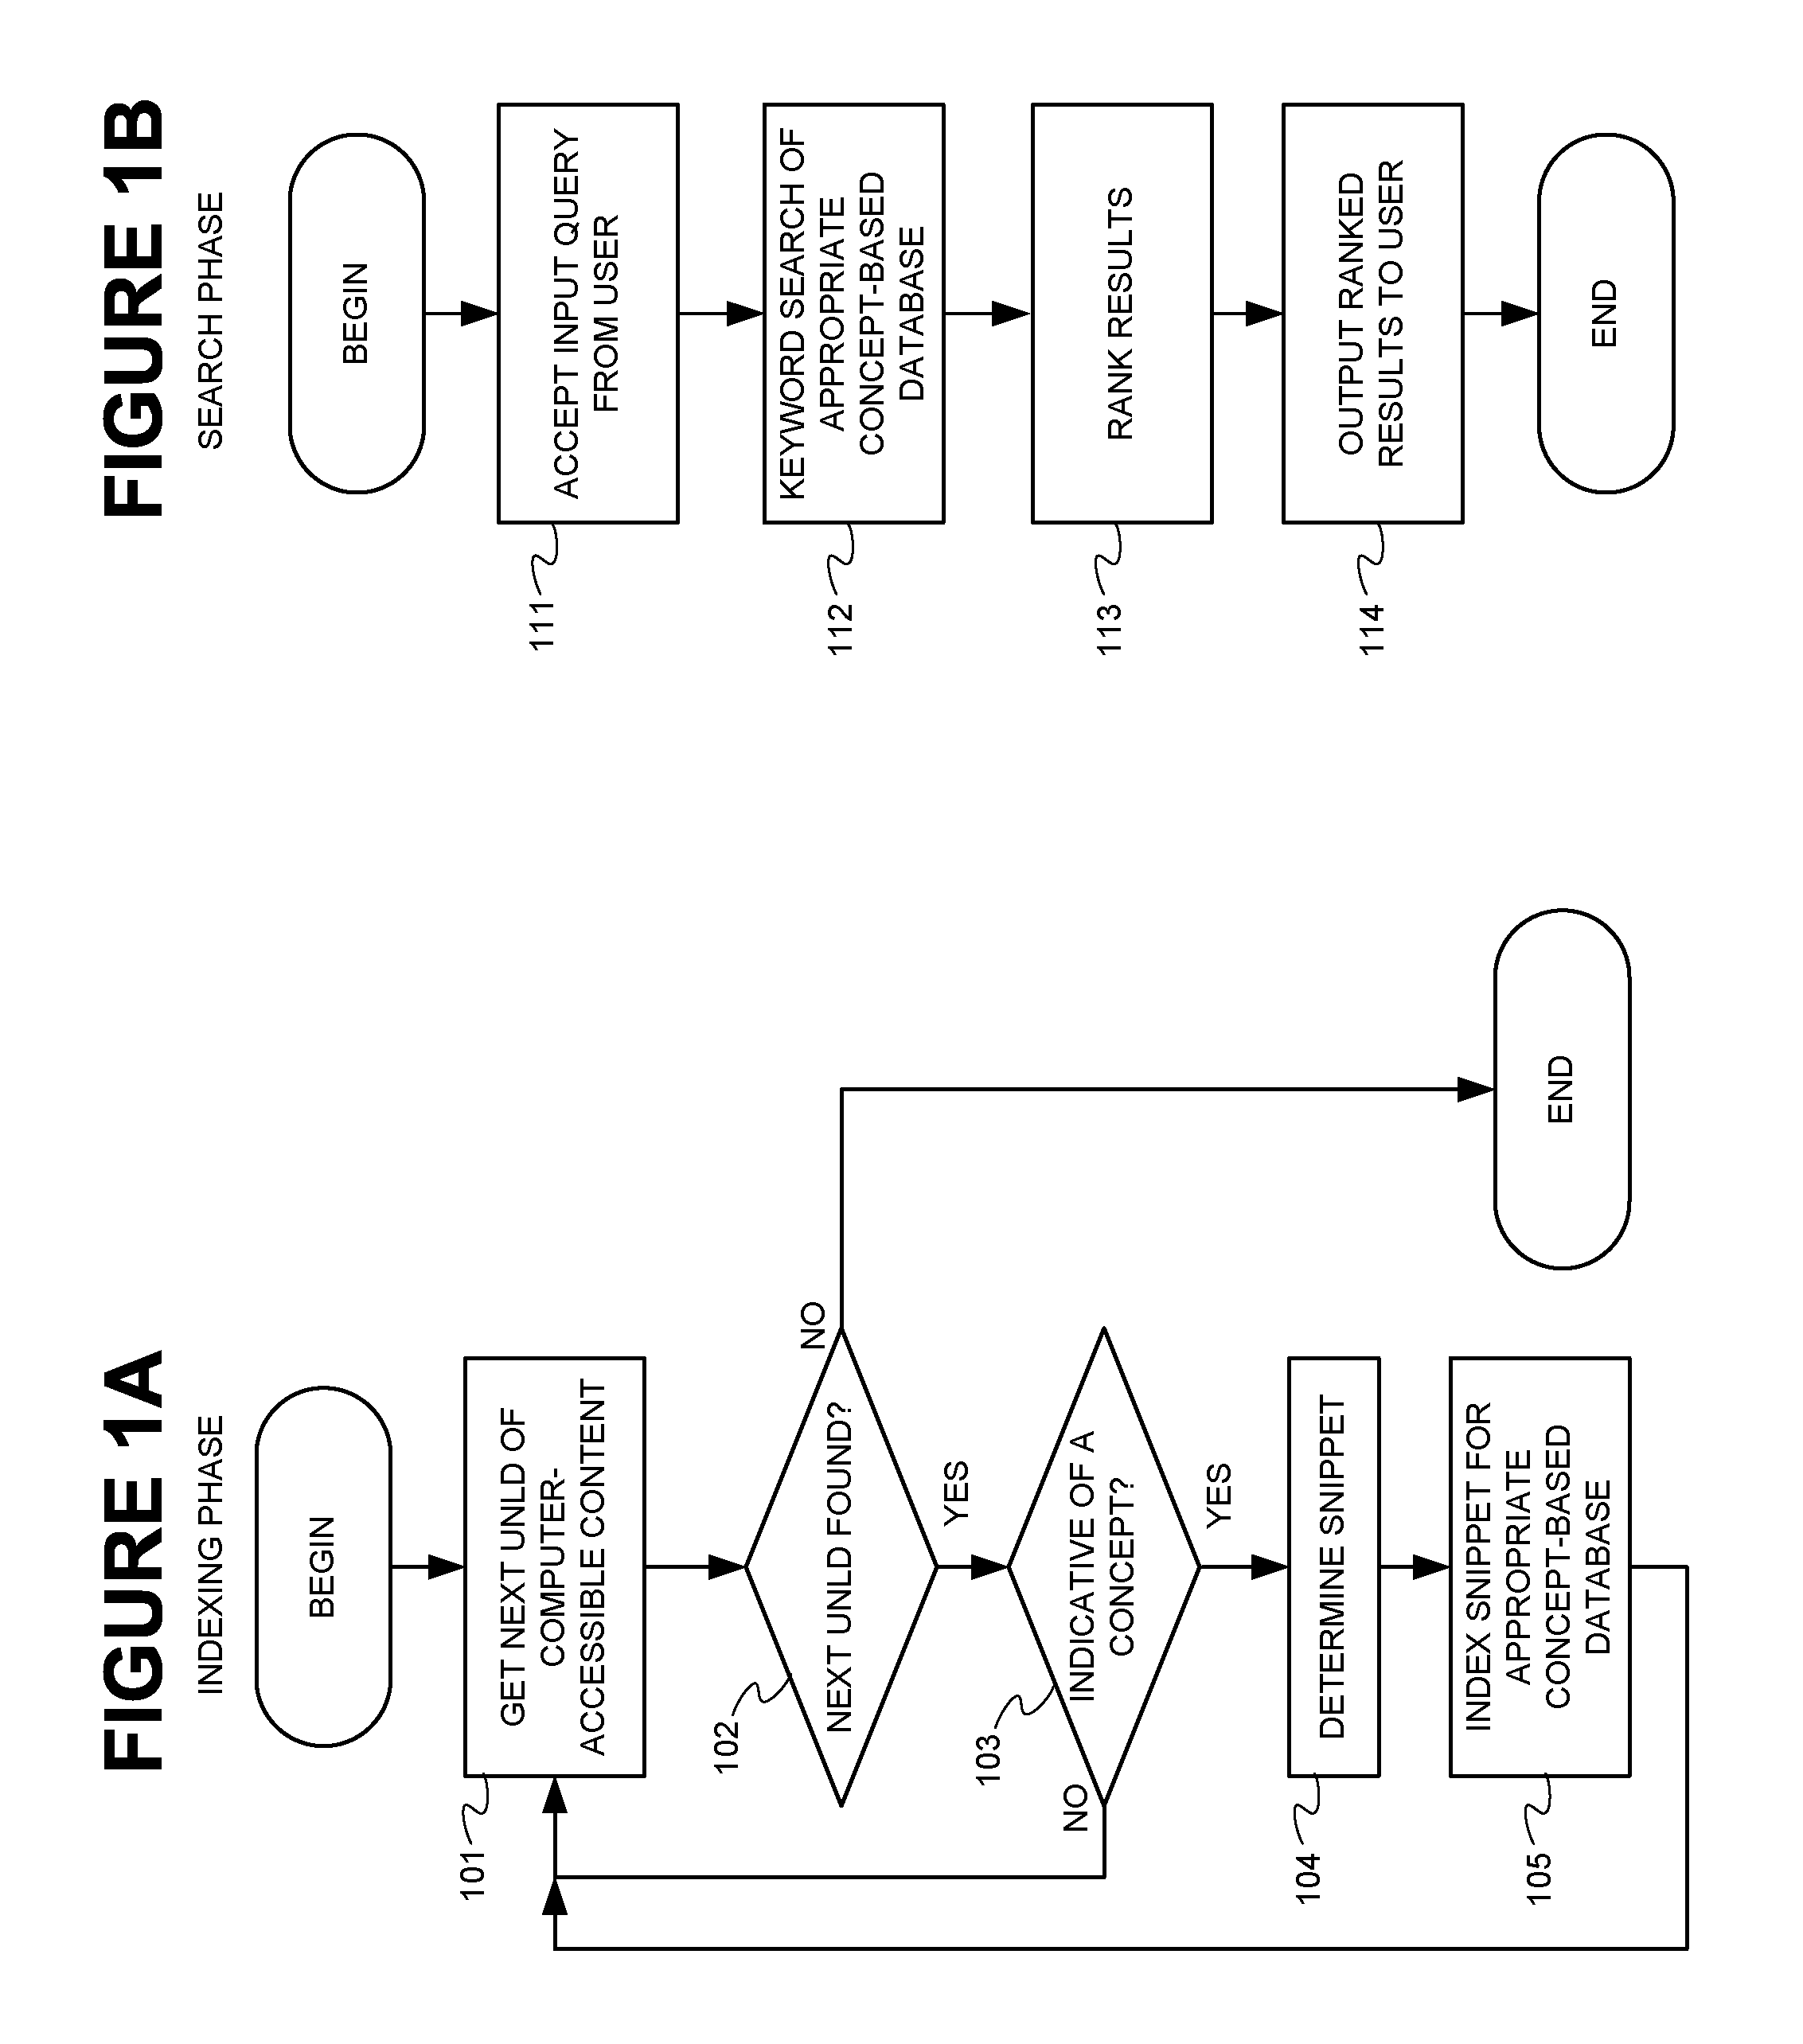 Method and apparatus for concept-based searching of natural language discourse